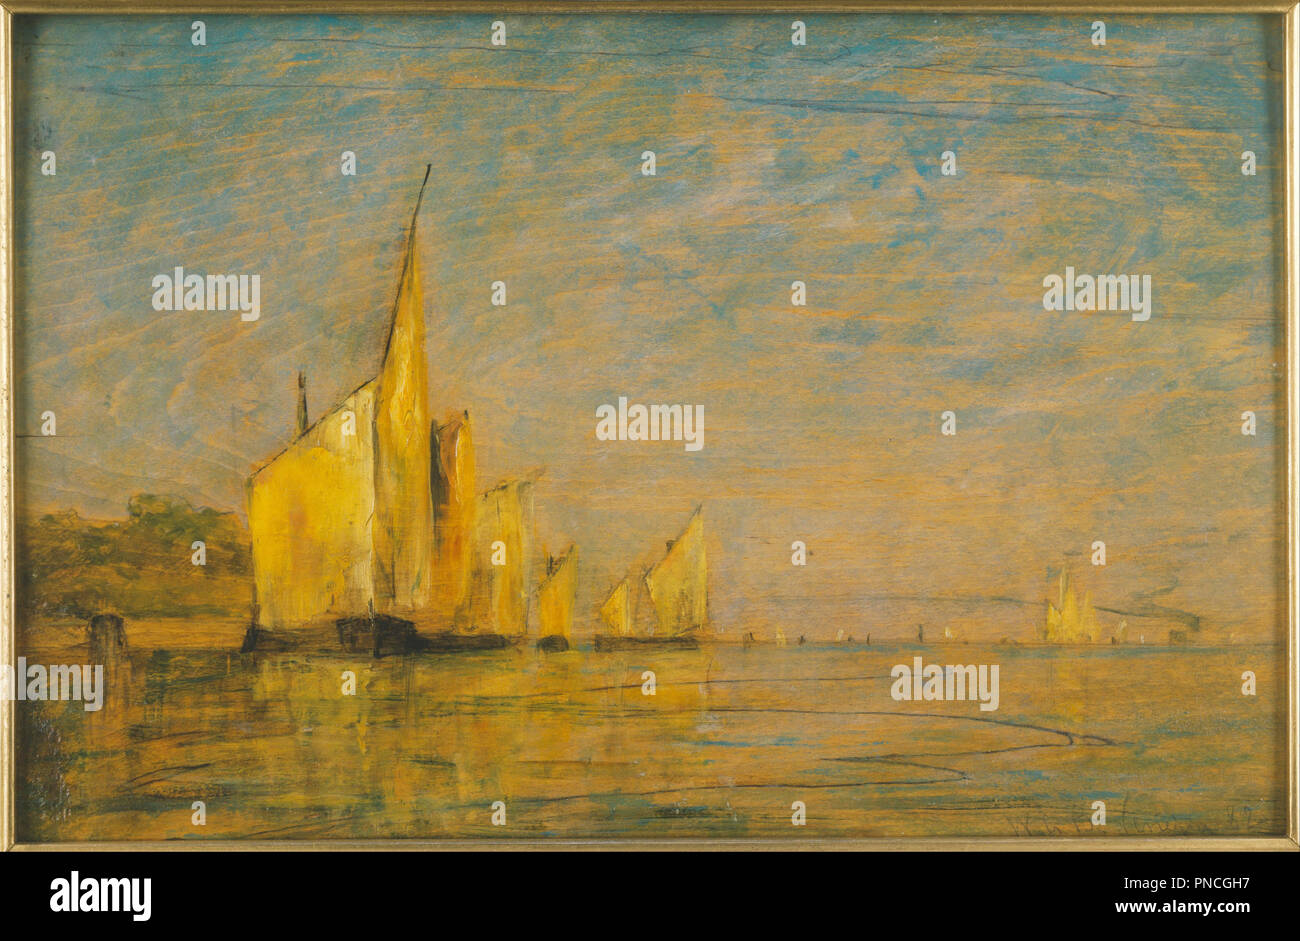 A Group of Boats, Venice. Date/Period: 1882. Painting. Oil on wood panel. Height: 8.50 mm (0.33 in); Width: 13 mm (0.51 in). Author: William Gedney Bunce. Stock Photo